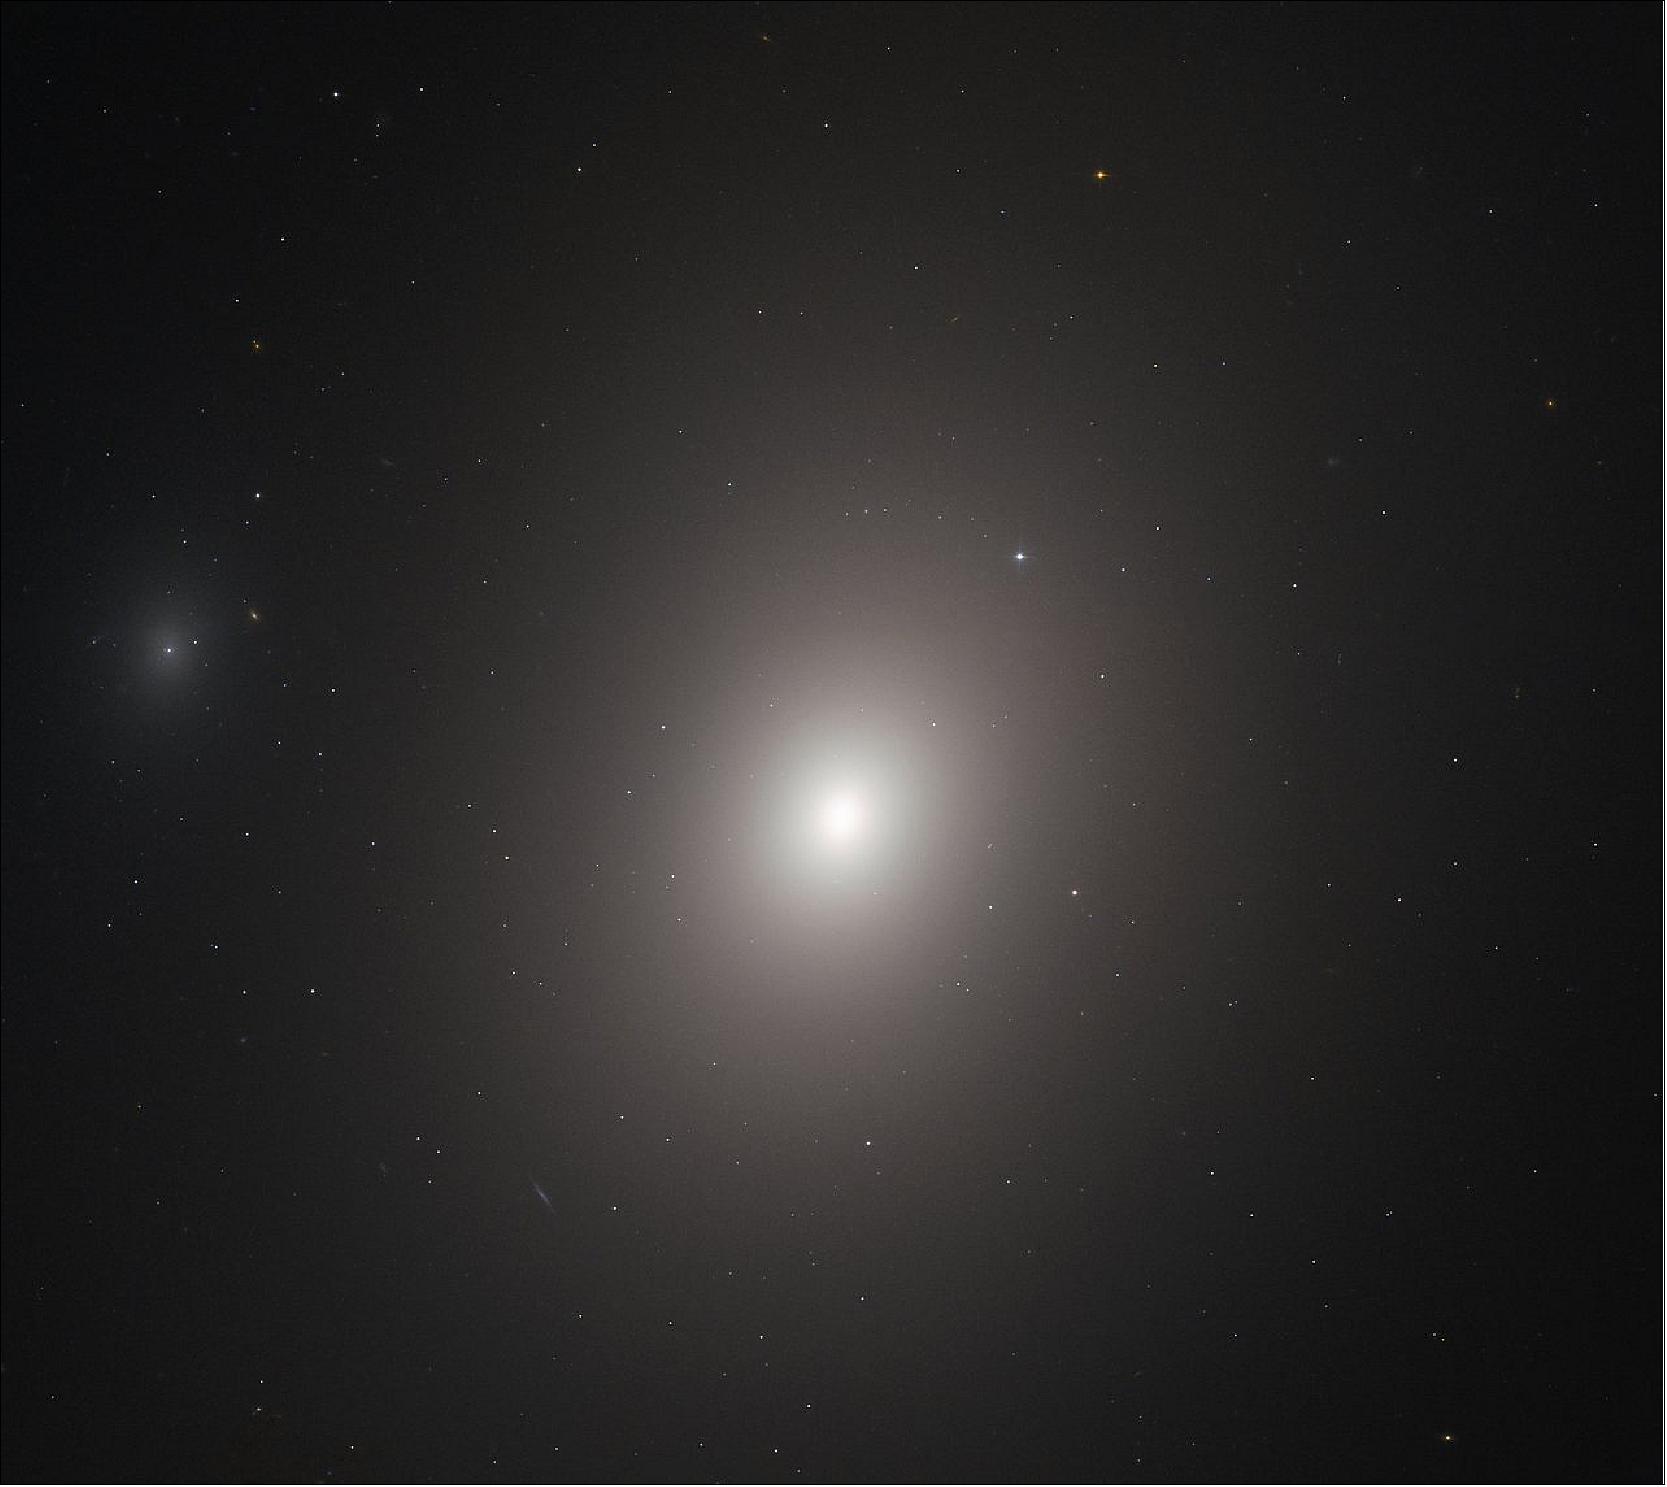 Figure 22: This image from the NASA/ESA Hubble Space Telescope shows the galaxy Messier 86. Despite its being discovered over 235 years ago by astronomer Charles Messier, the morphological classification of Messier 86 remains unclear; astronomers are still debating over whether it is either elliptical or lenticular (the latter being a cross between an elliptical and spiral galaxy), image credit: ESA/Hubble & NASA, P. Cote et al.